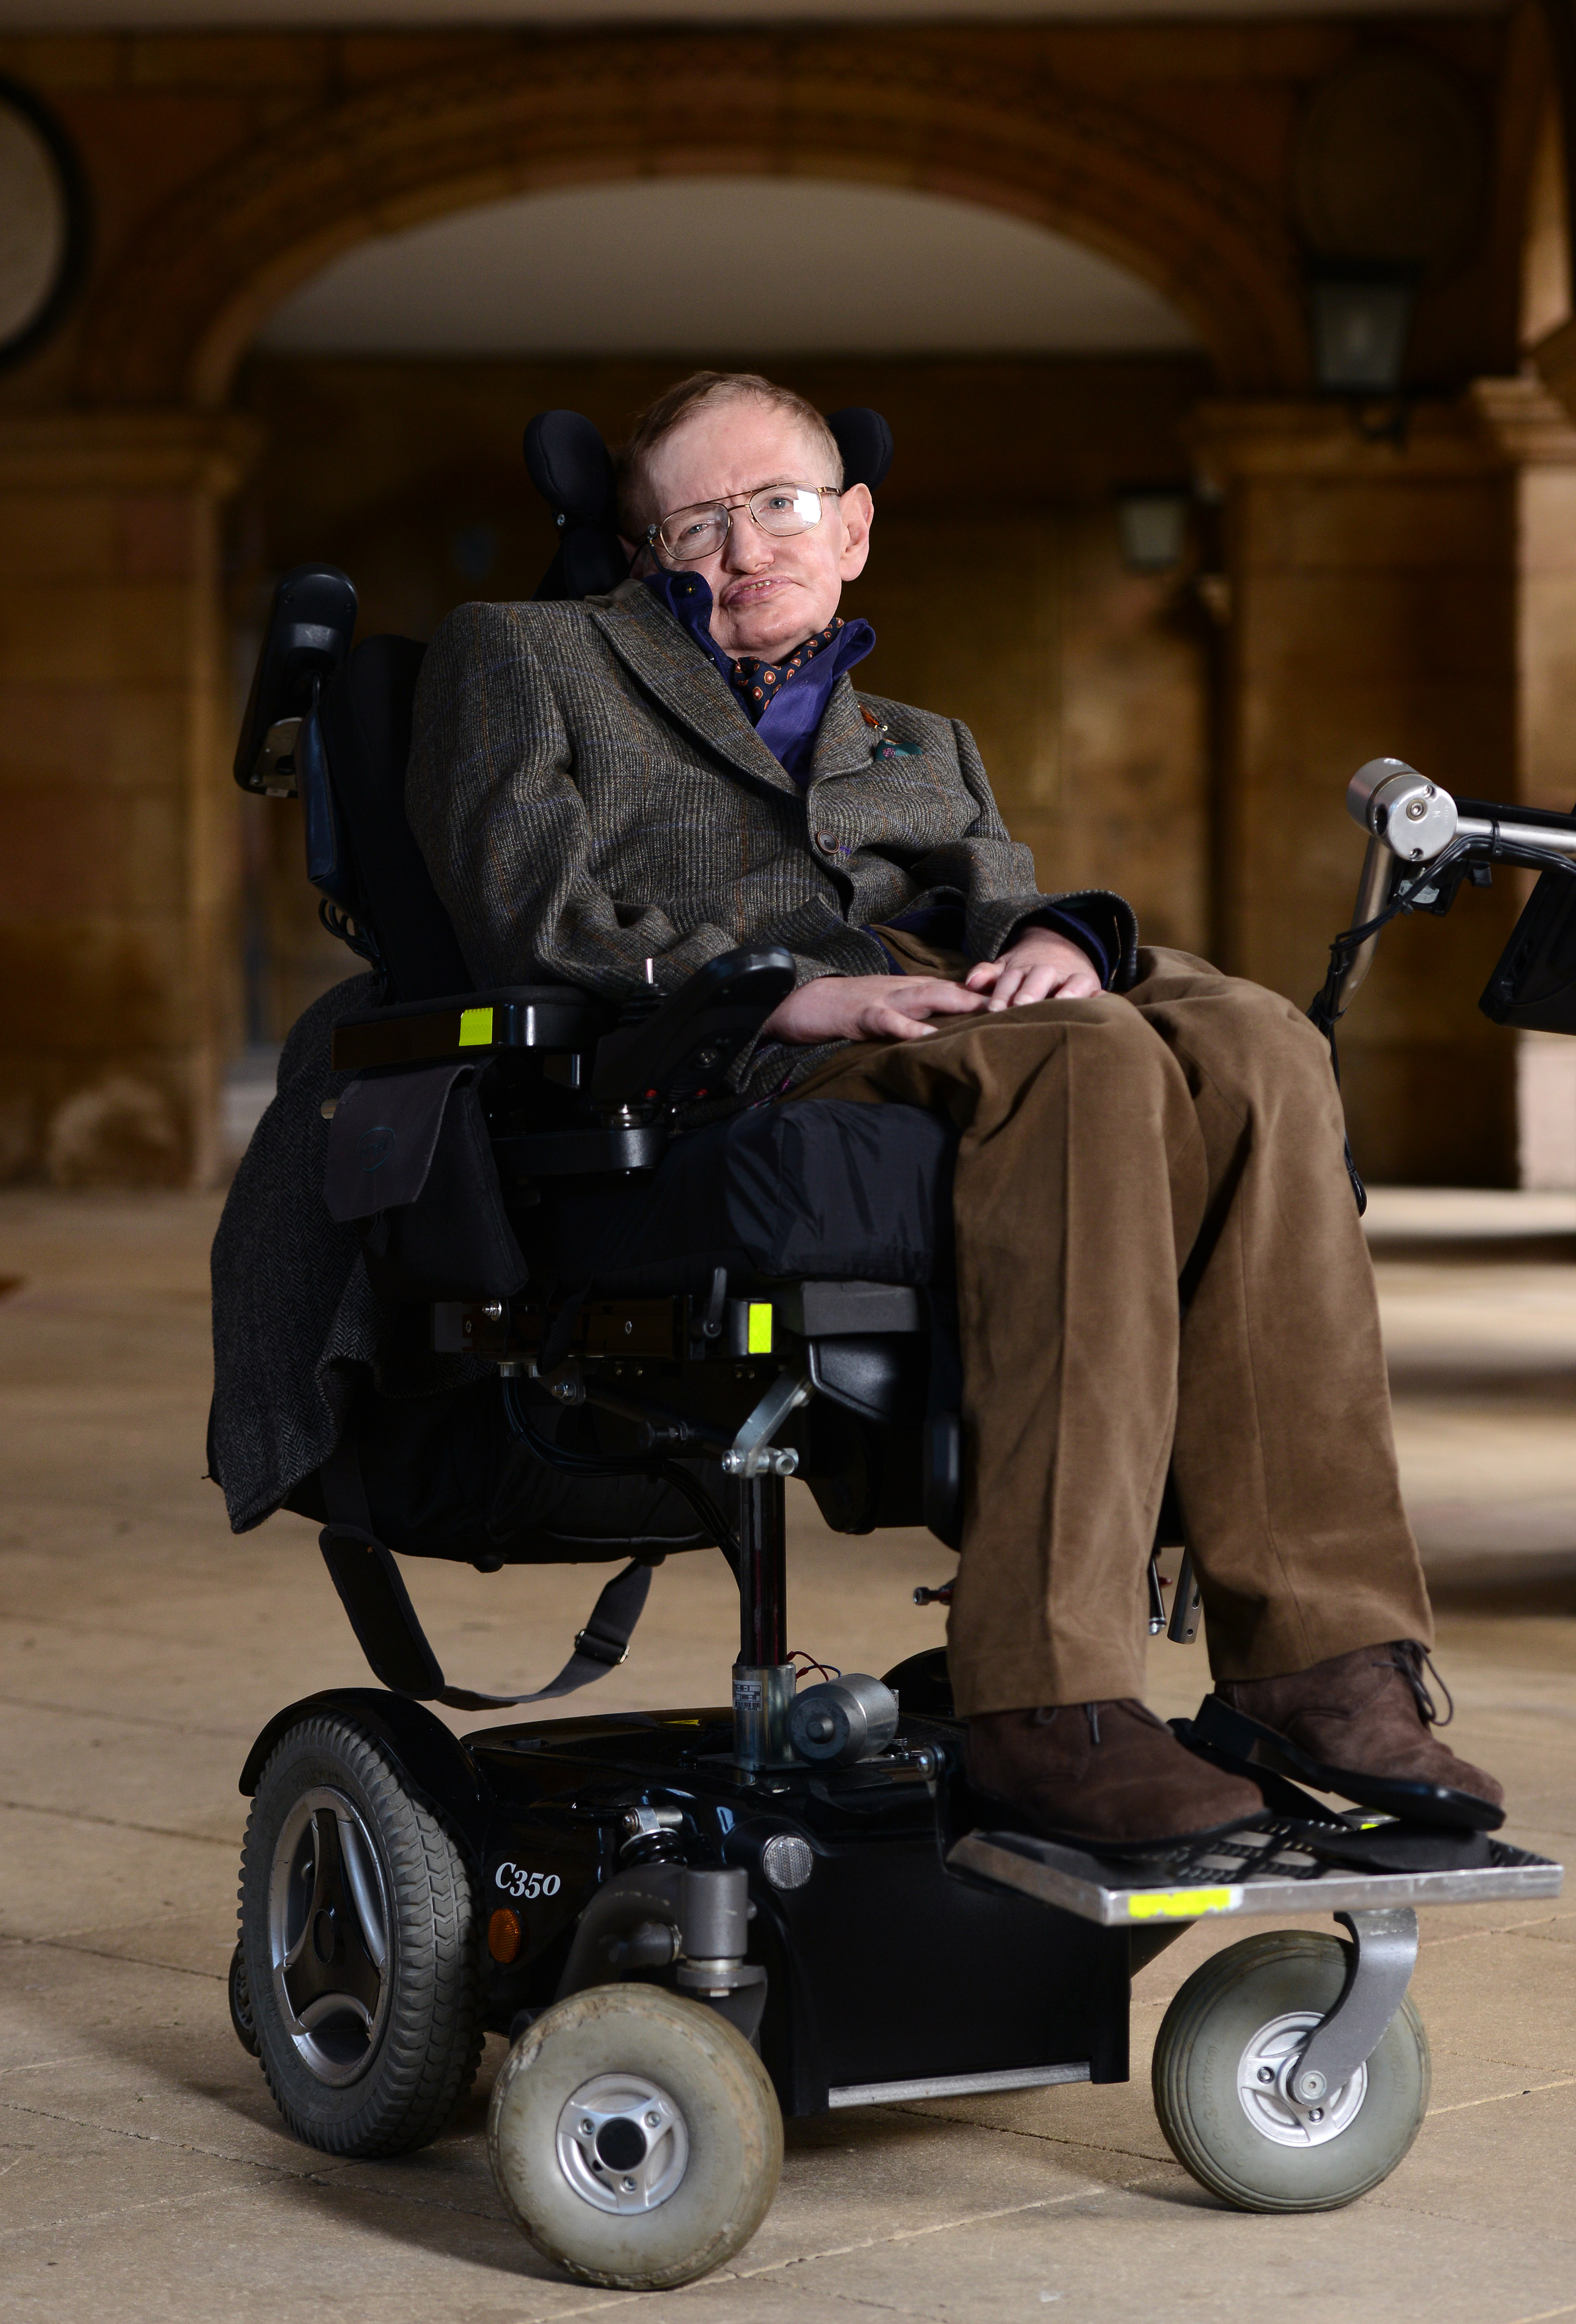 Professor Stephen Hawking attends the gala screening of "Hawking" on the opening night of the Cambridge Film Festival held at Emmanuel College on September 19, 2013 in Cambridge, Cambridgeshire. (Karwai Tang—Getty Images)